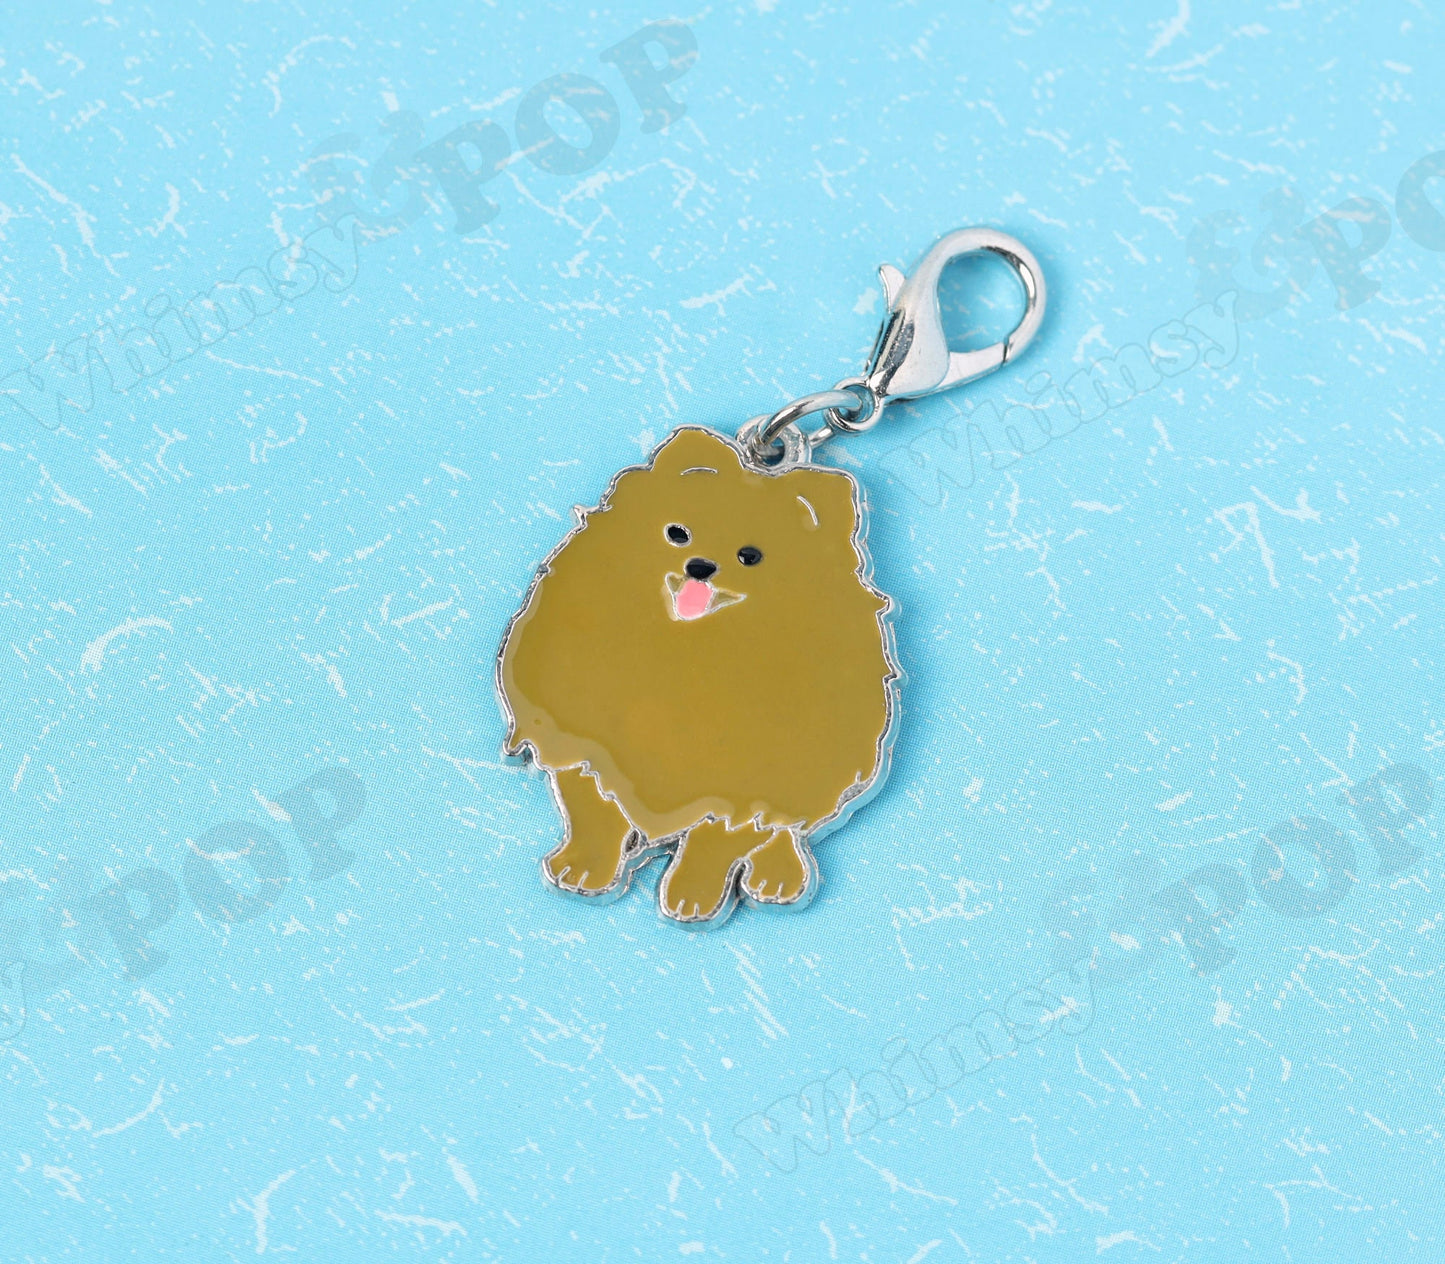 Pomeranian or Long Haired Chihuahua Enamel Dog Charms